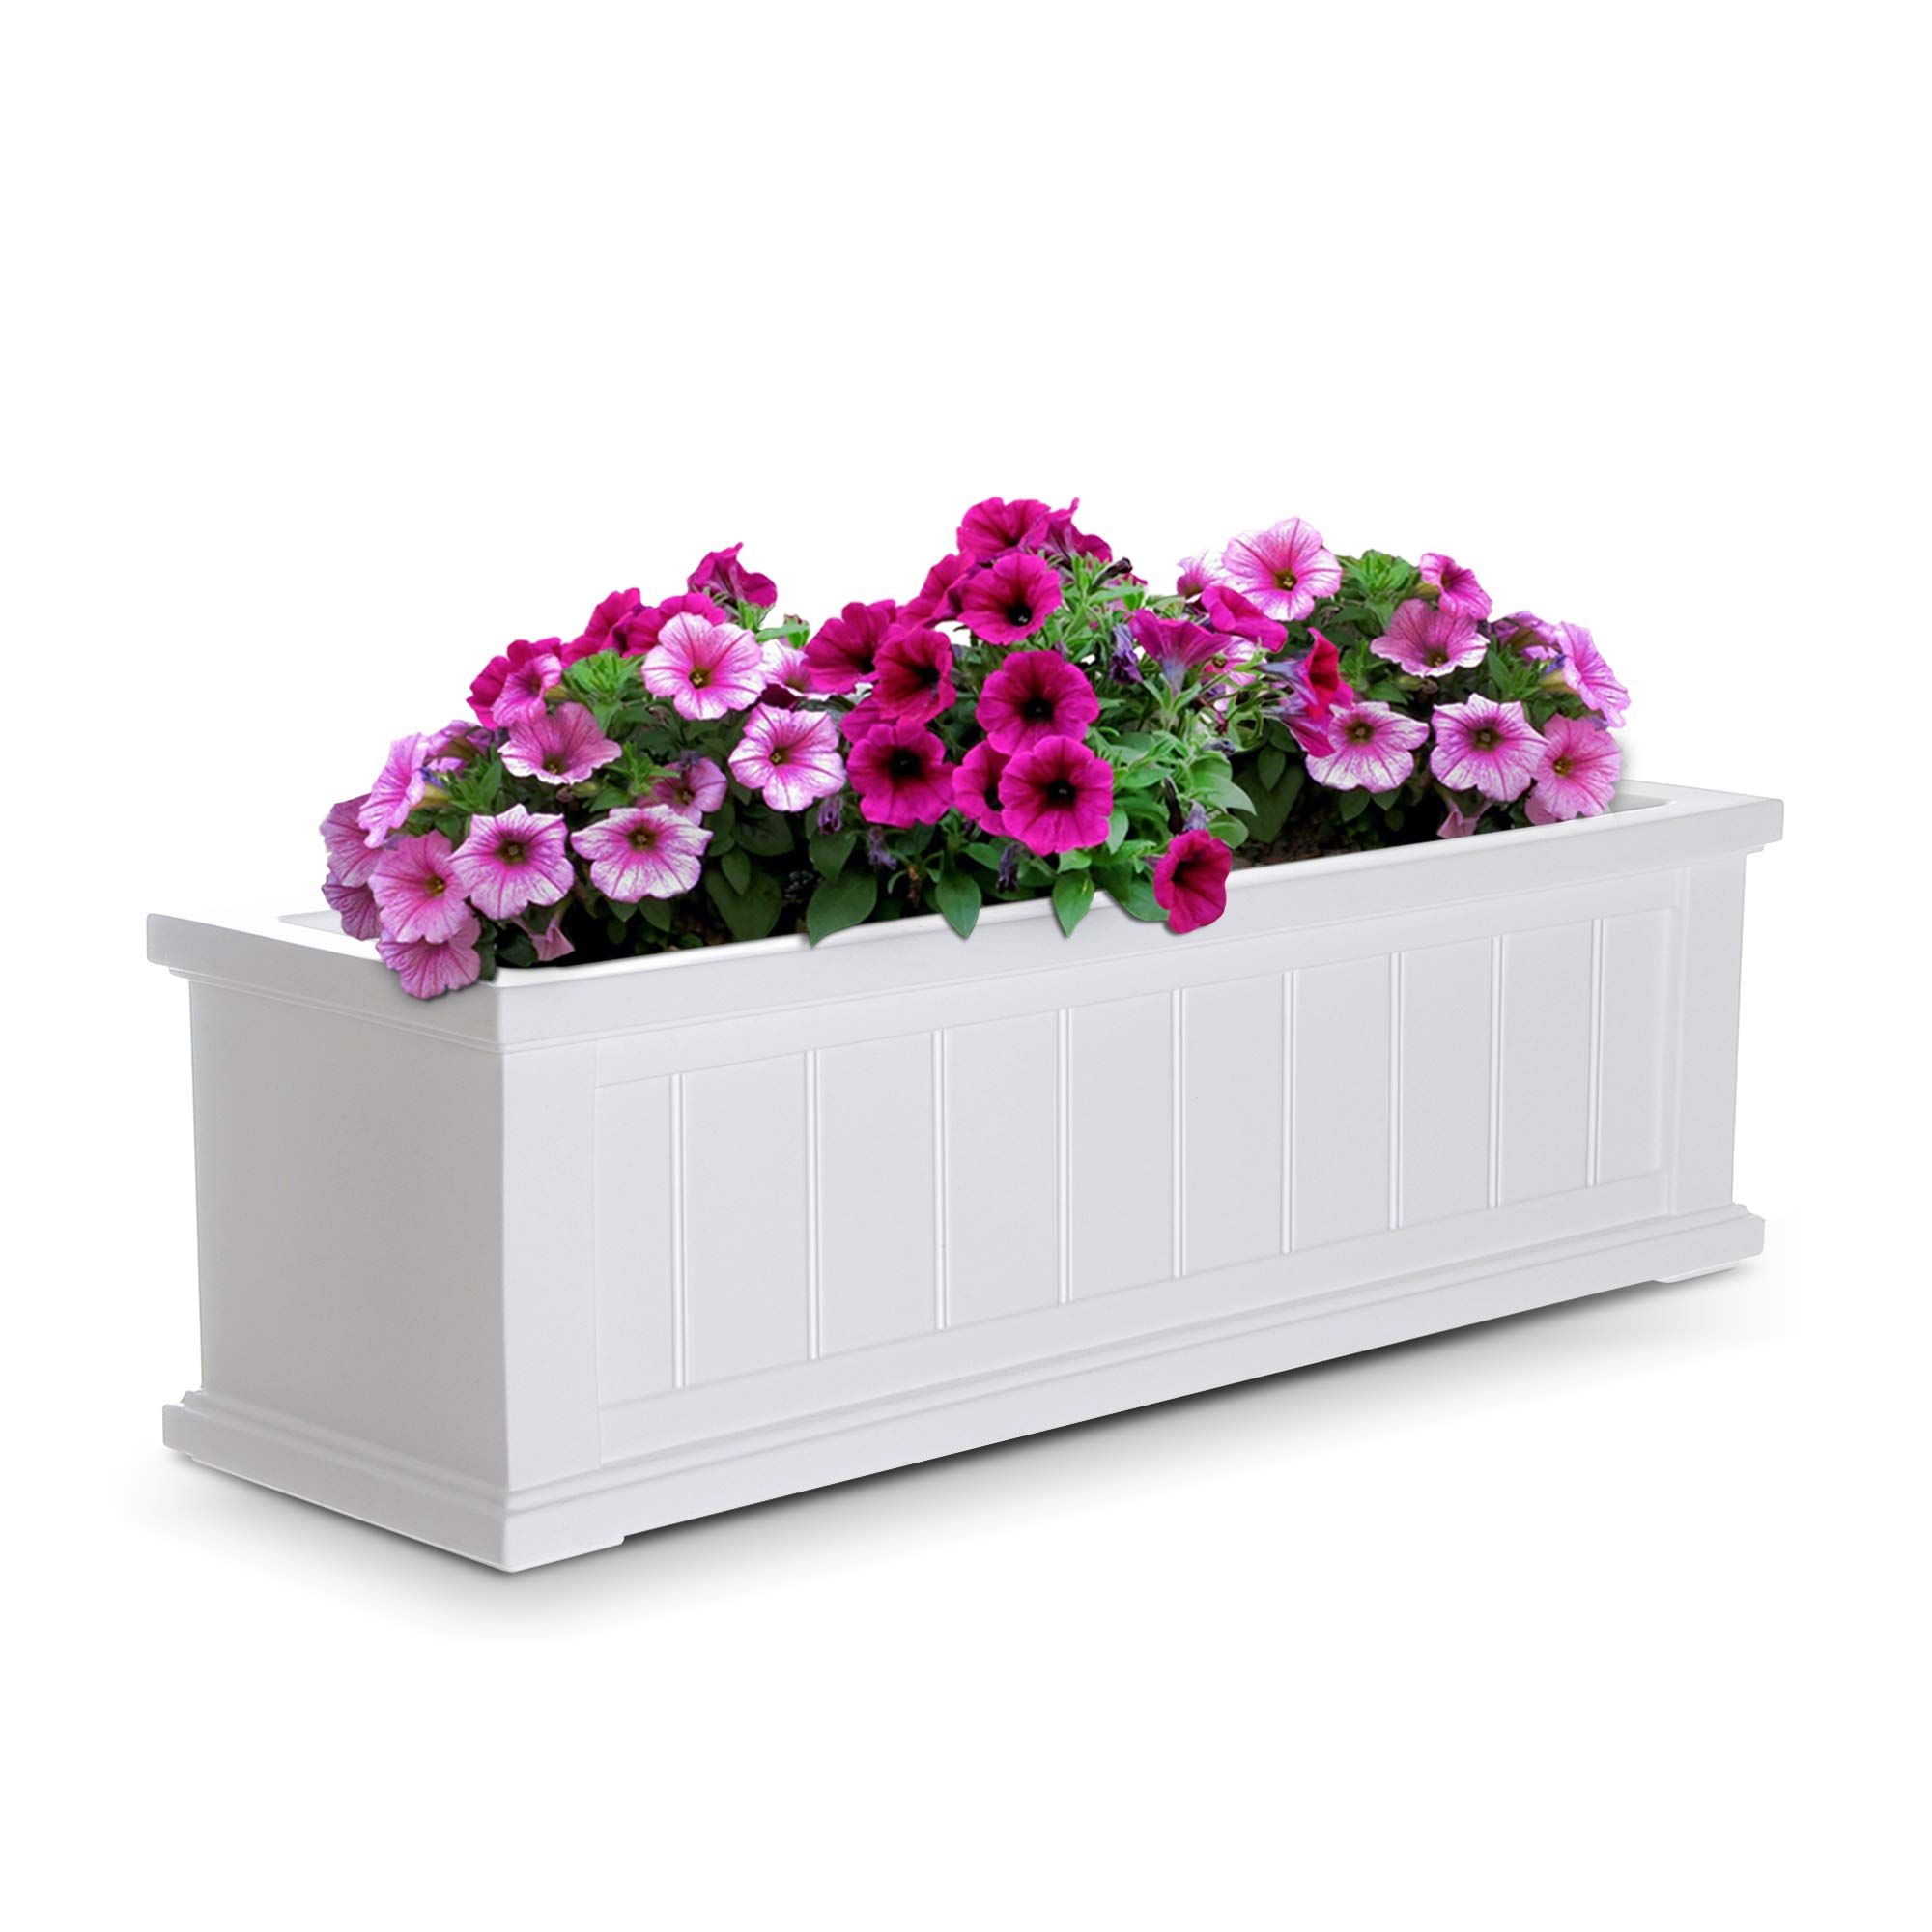 Mayne Cape Cod 3ft Window Box - White - 36in L x 11in W x 10.8in H - with 6.5 Gallon Built-in Water  | Amazon (US)